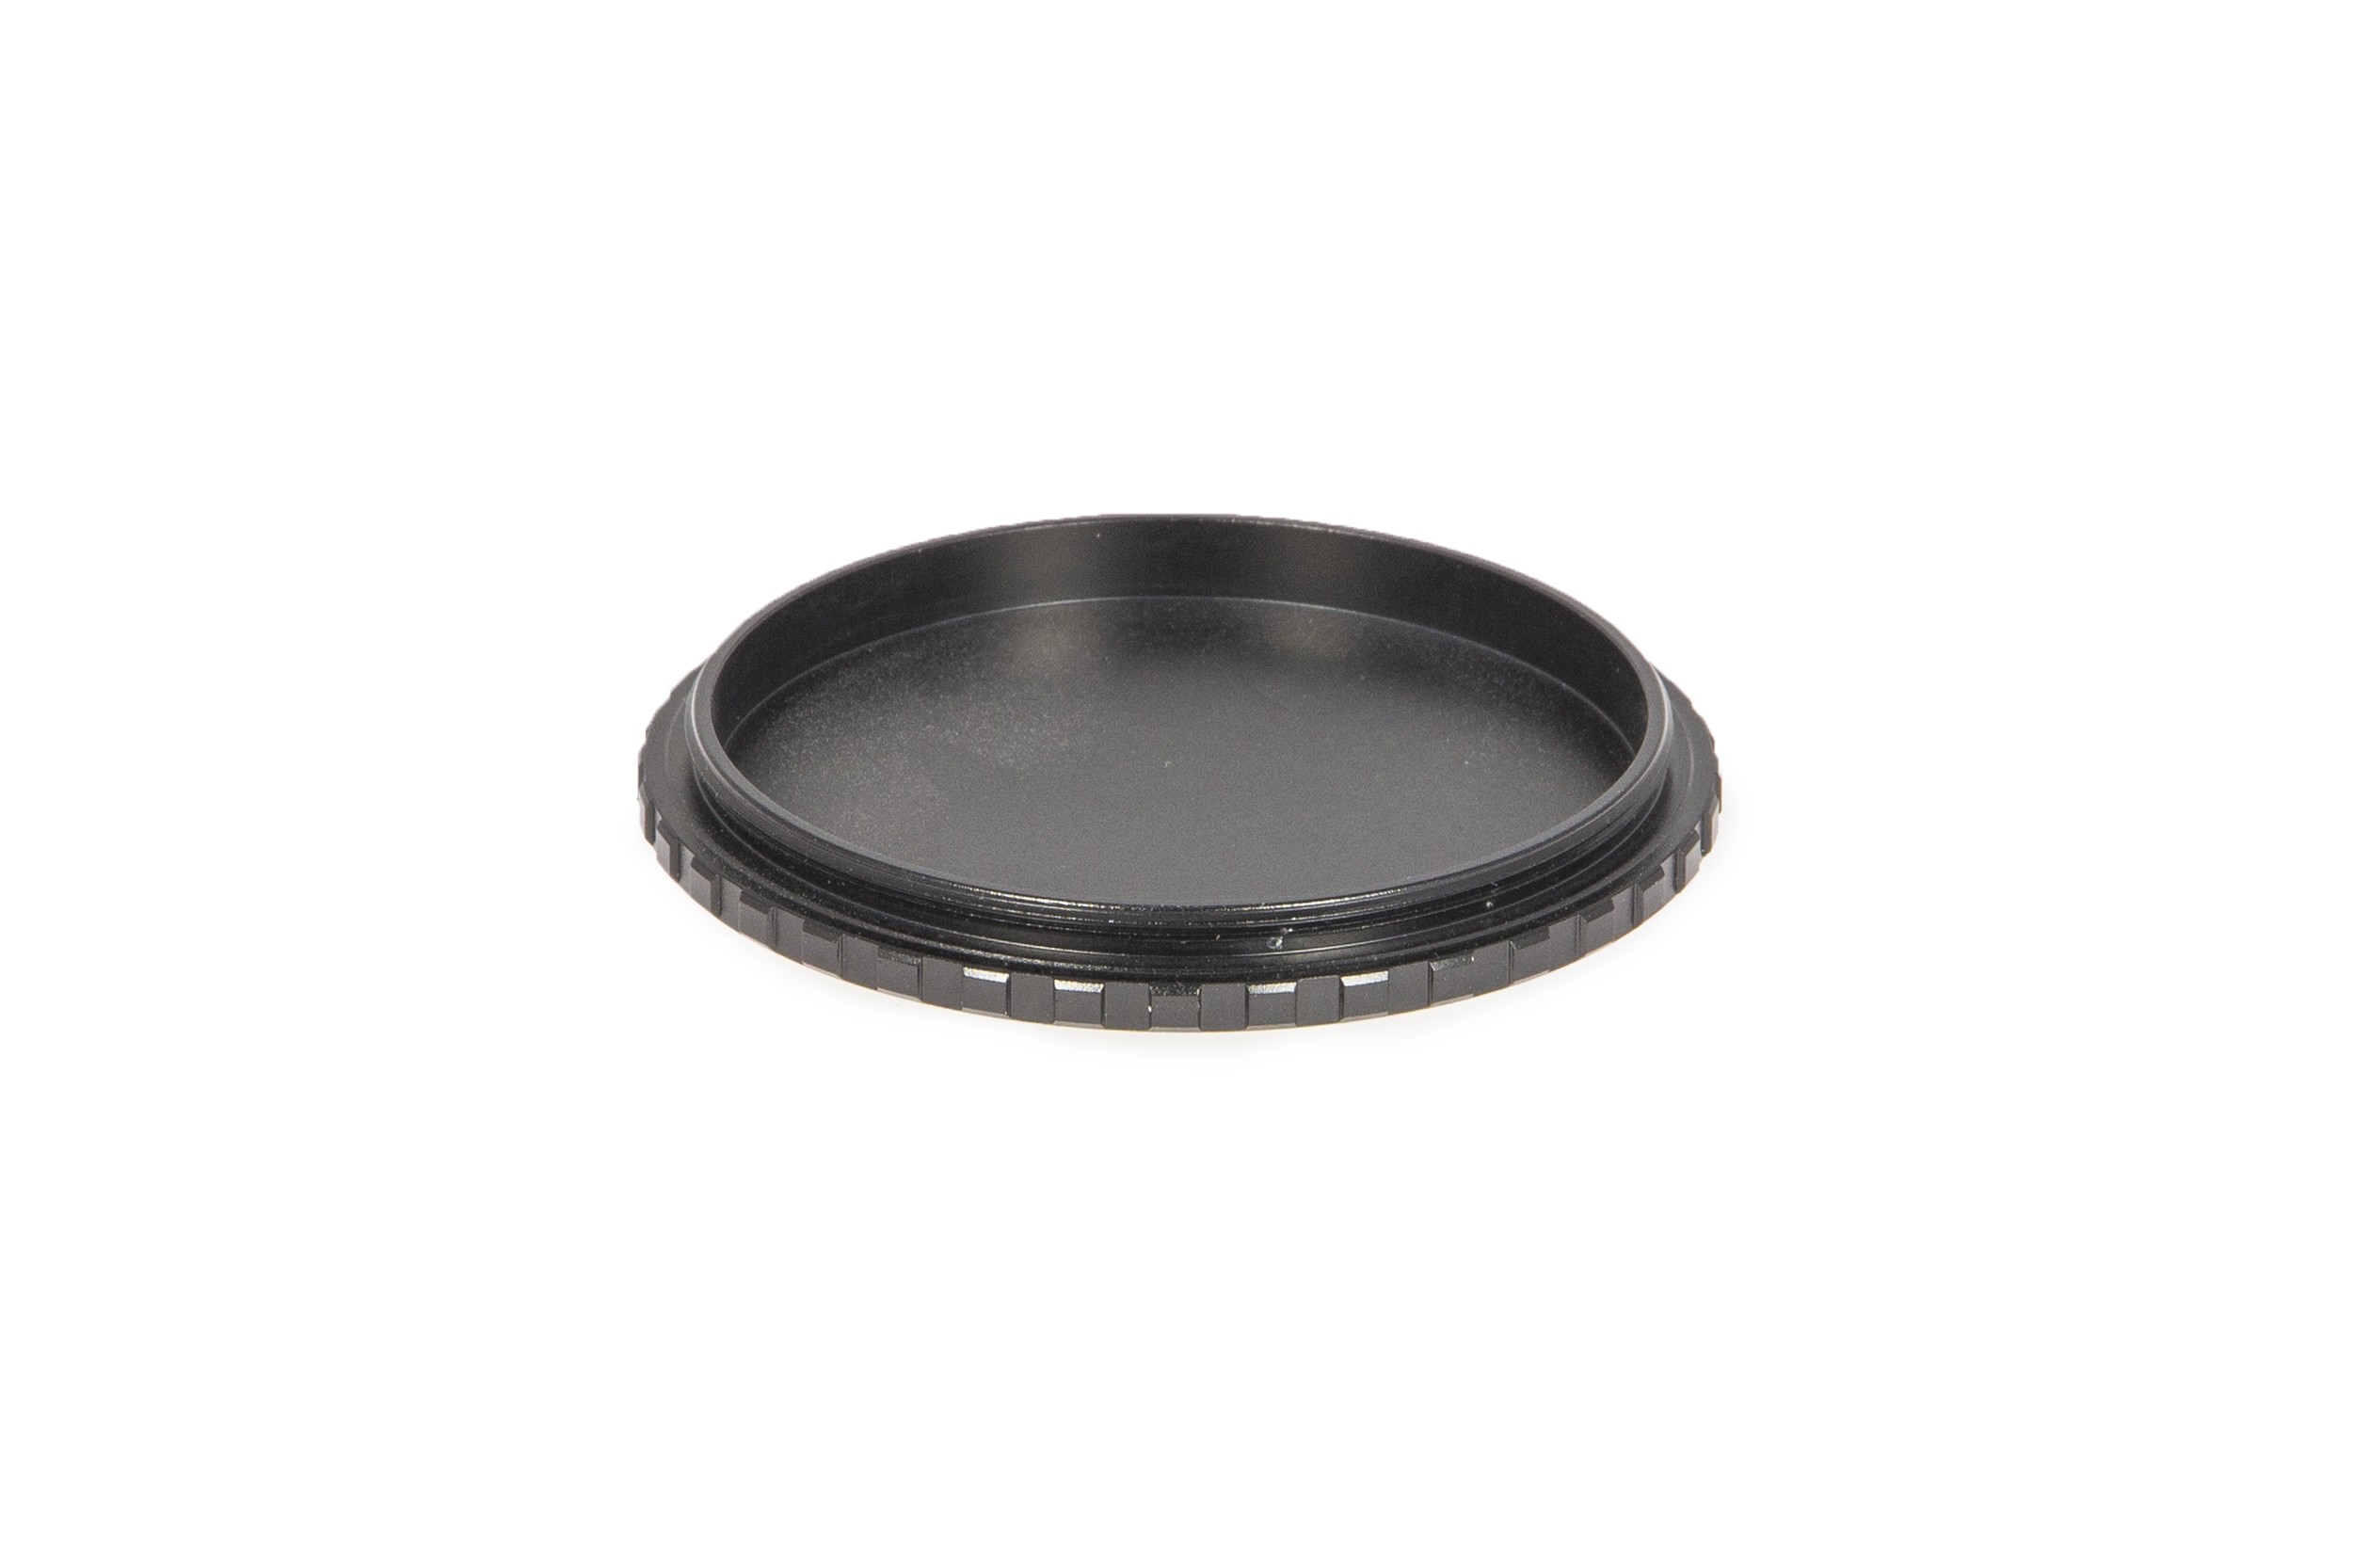 Baader Metal M68 Dustcap with M68 x 1 male thread